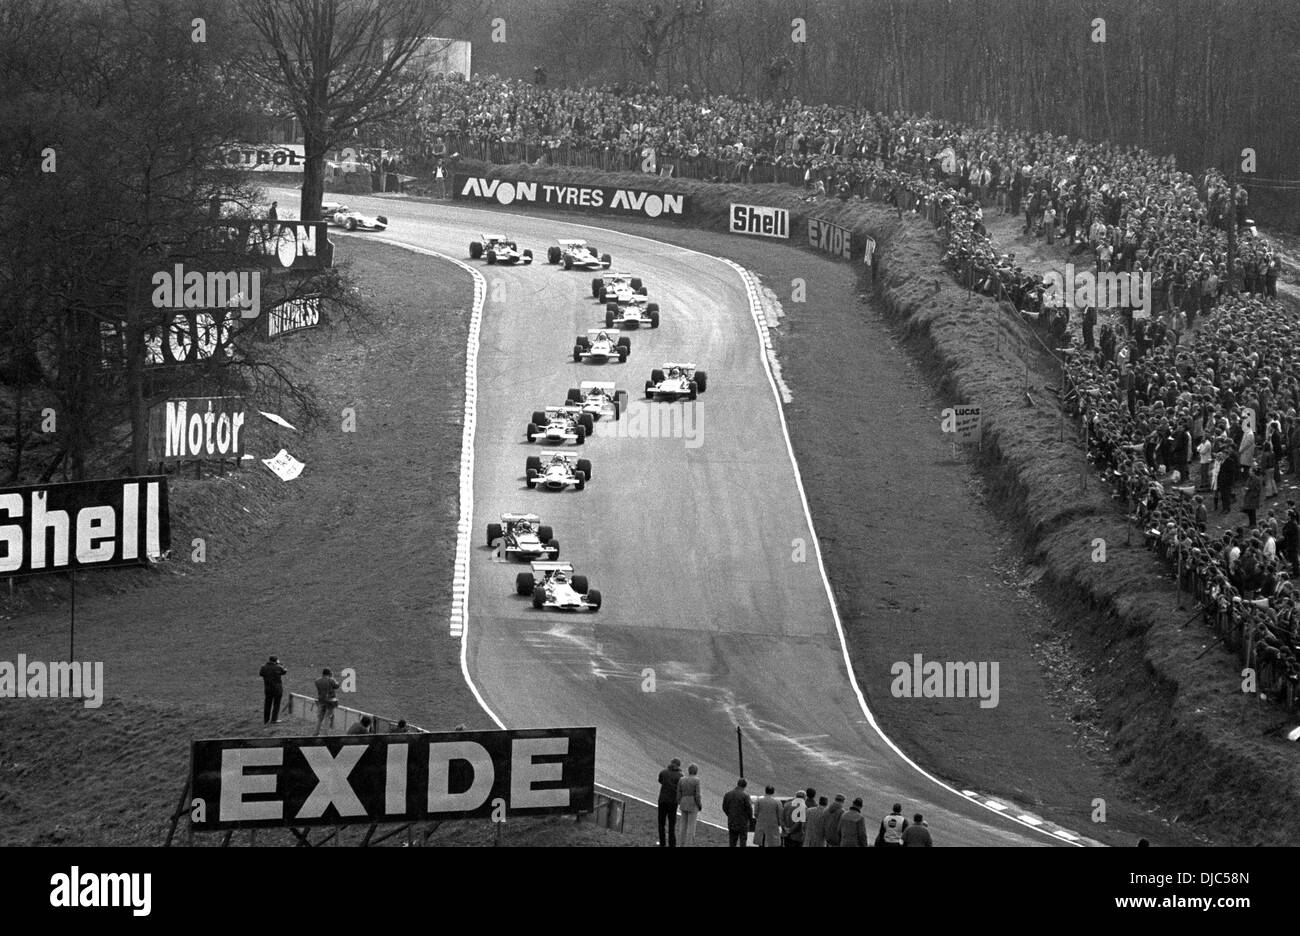 Down from Druid's Hill to Bottom Bend, the Race of Champions, Brands Hatch, England 22 March 1970. Stock Photo